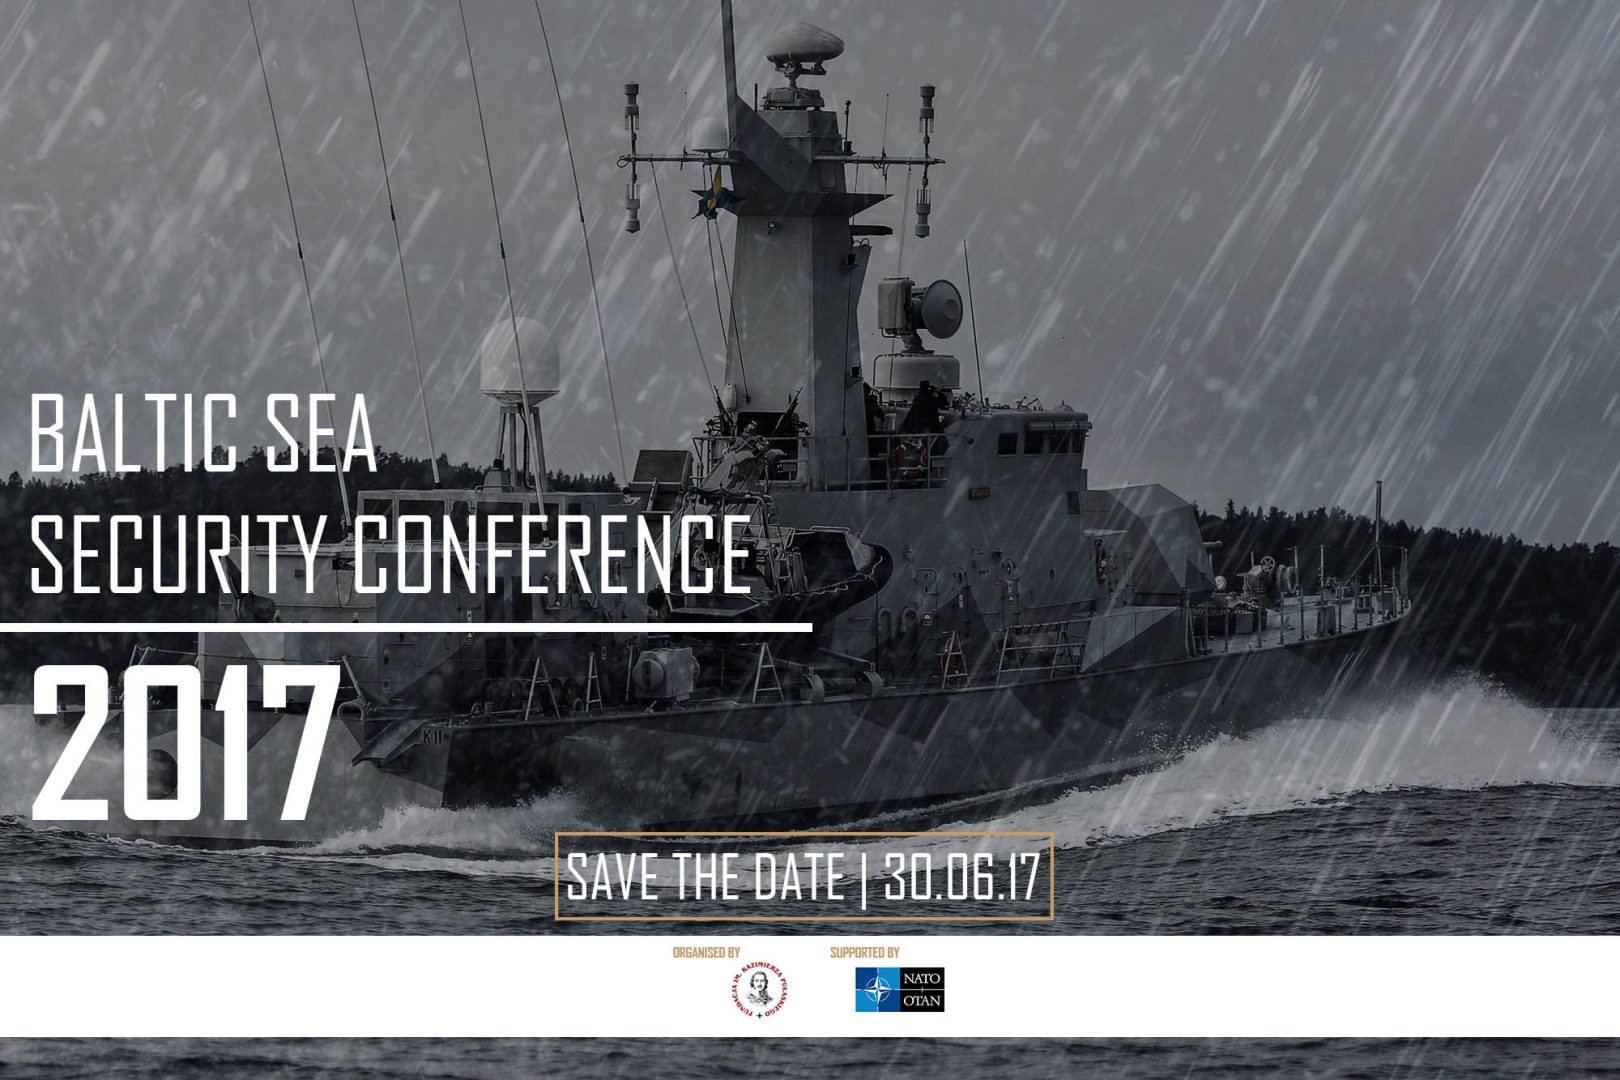 SAVE THE DATE – Baltic Sea Security Conference 2017